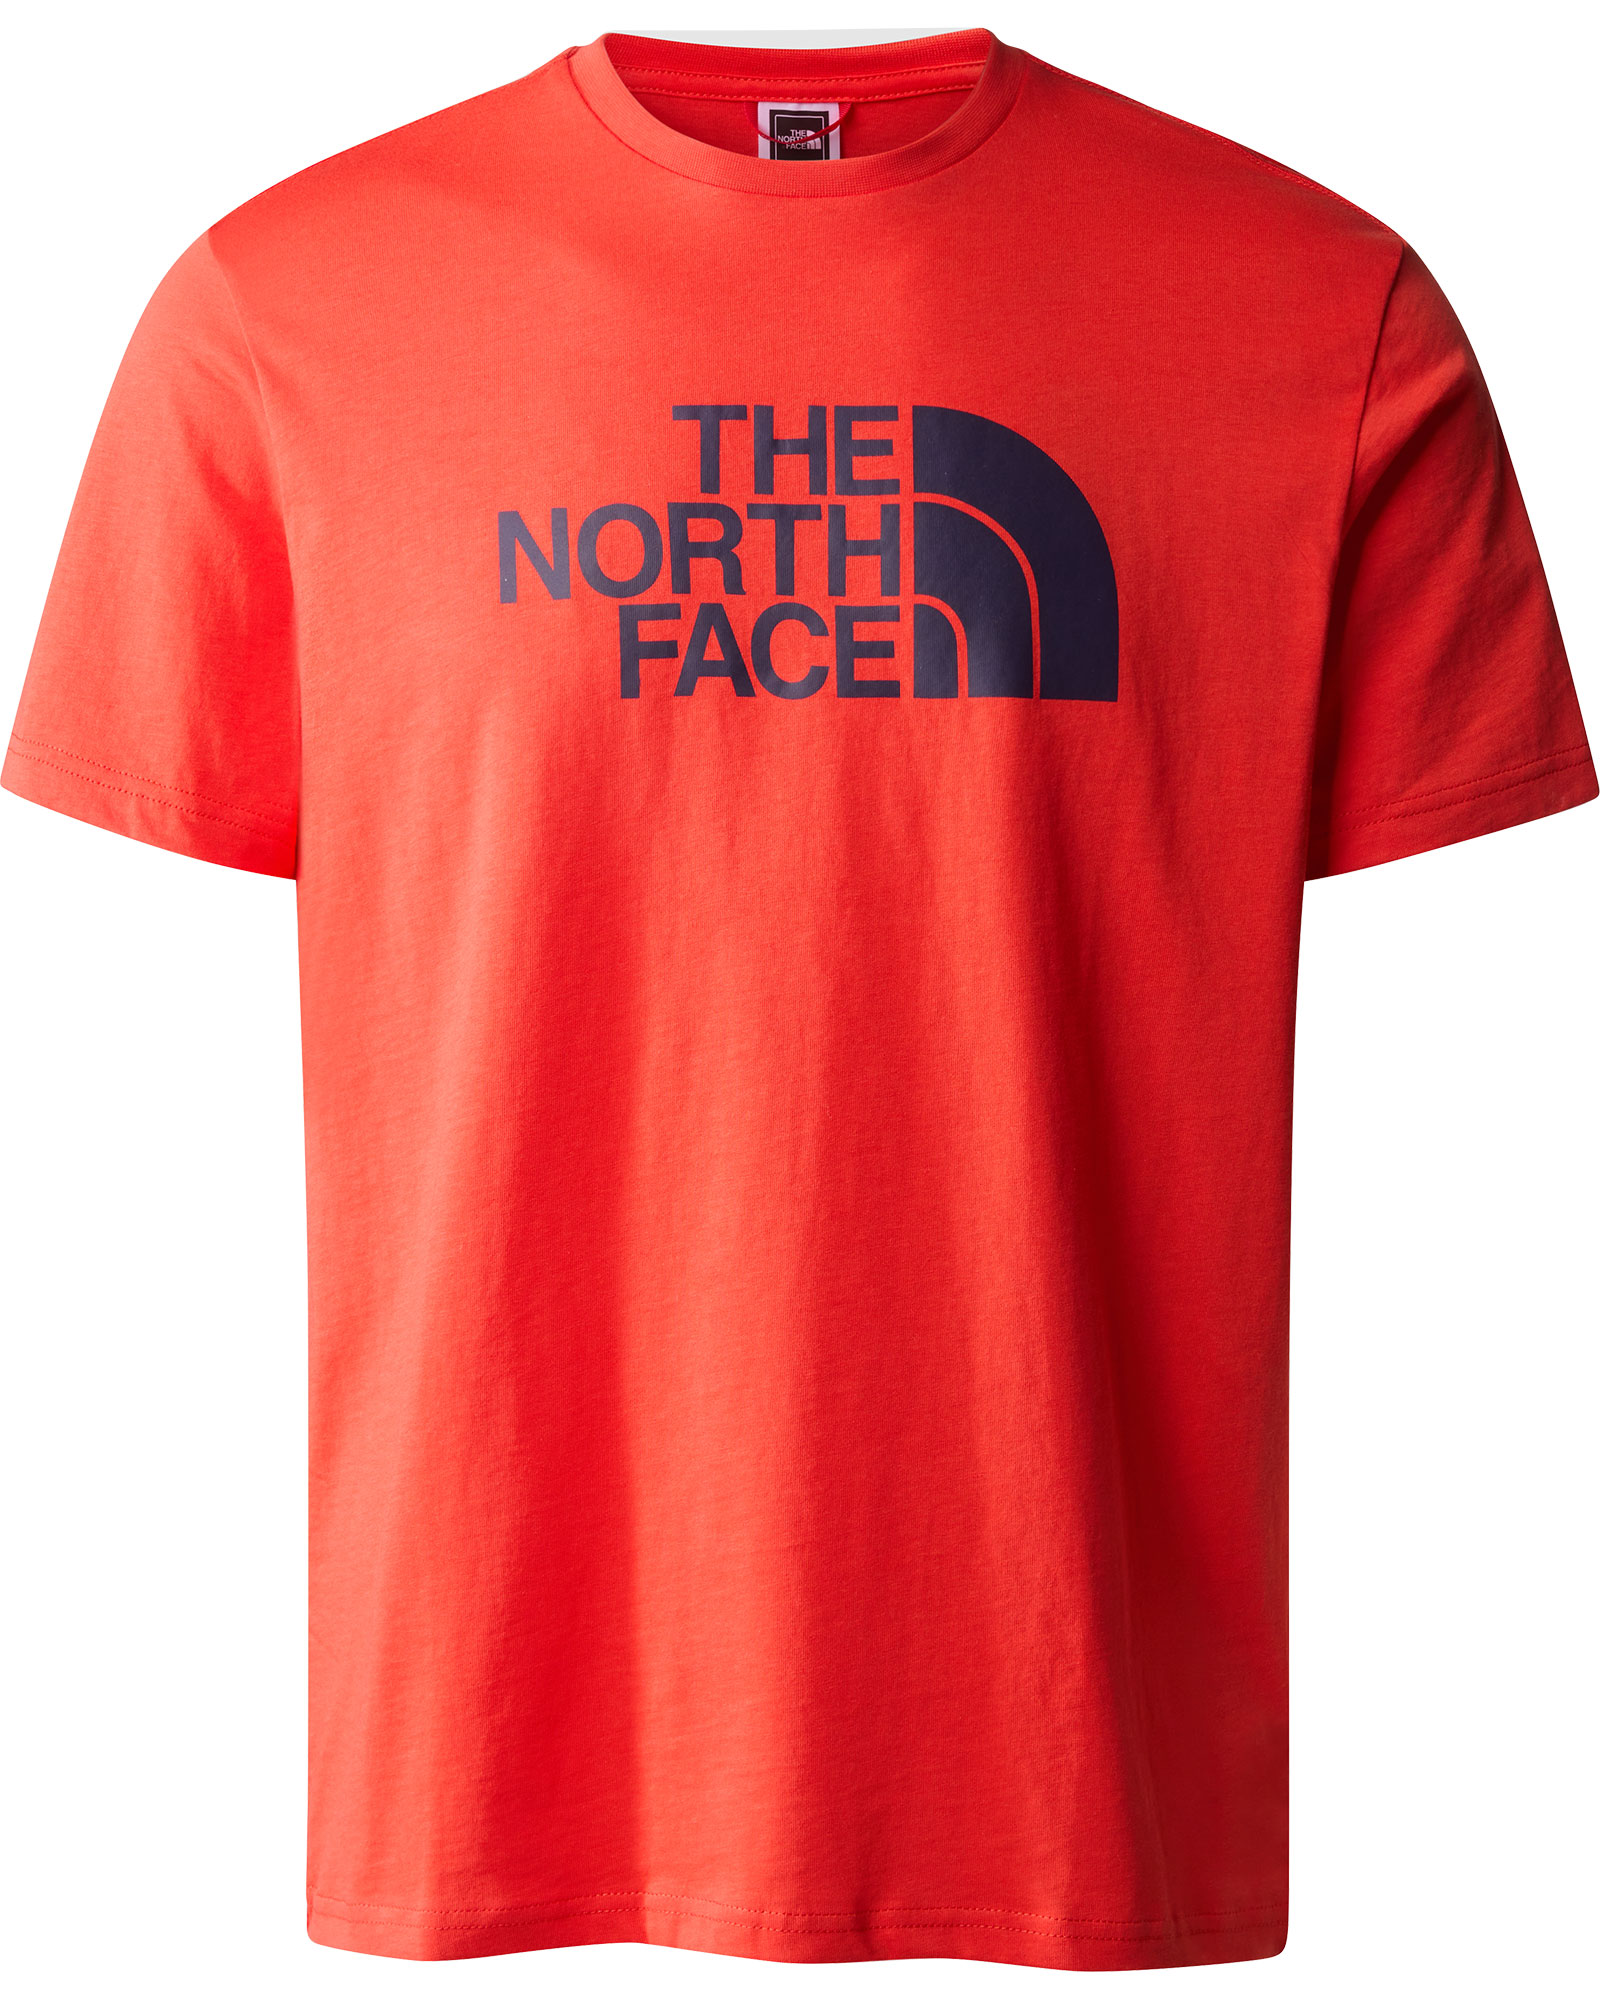 The North Face Easy Men’s T Shirt - Fiery Red L